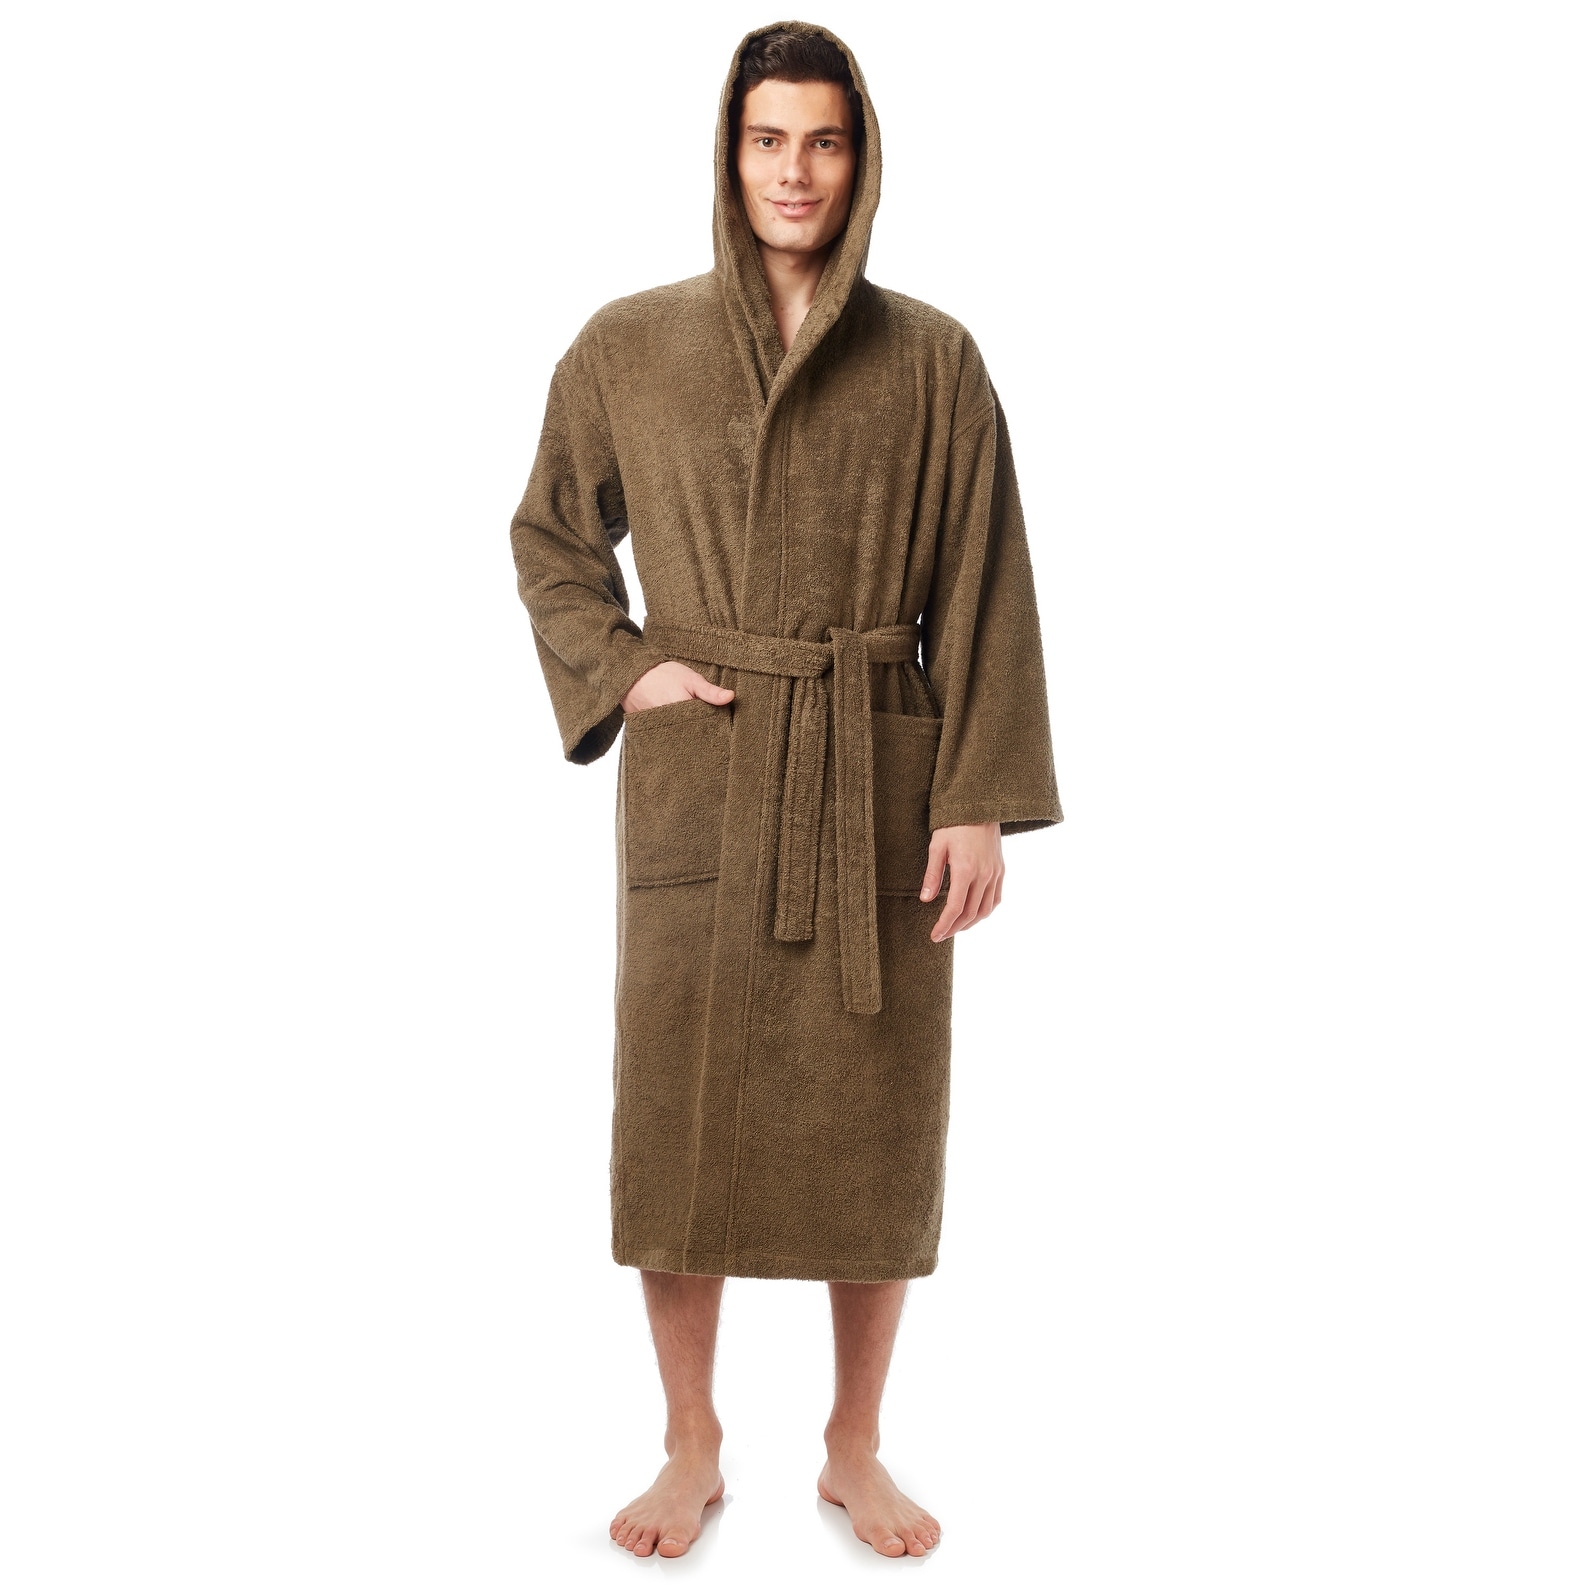 Mens Dressing Gowns | Mens Dressing Gowns at Littlewoods.com